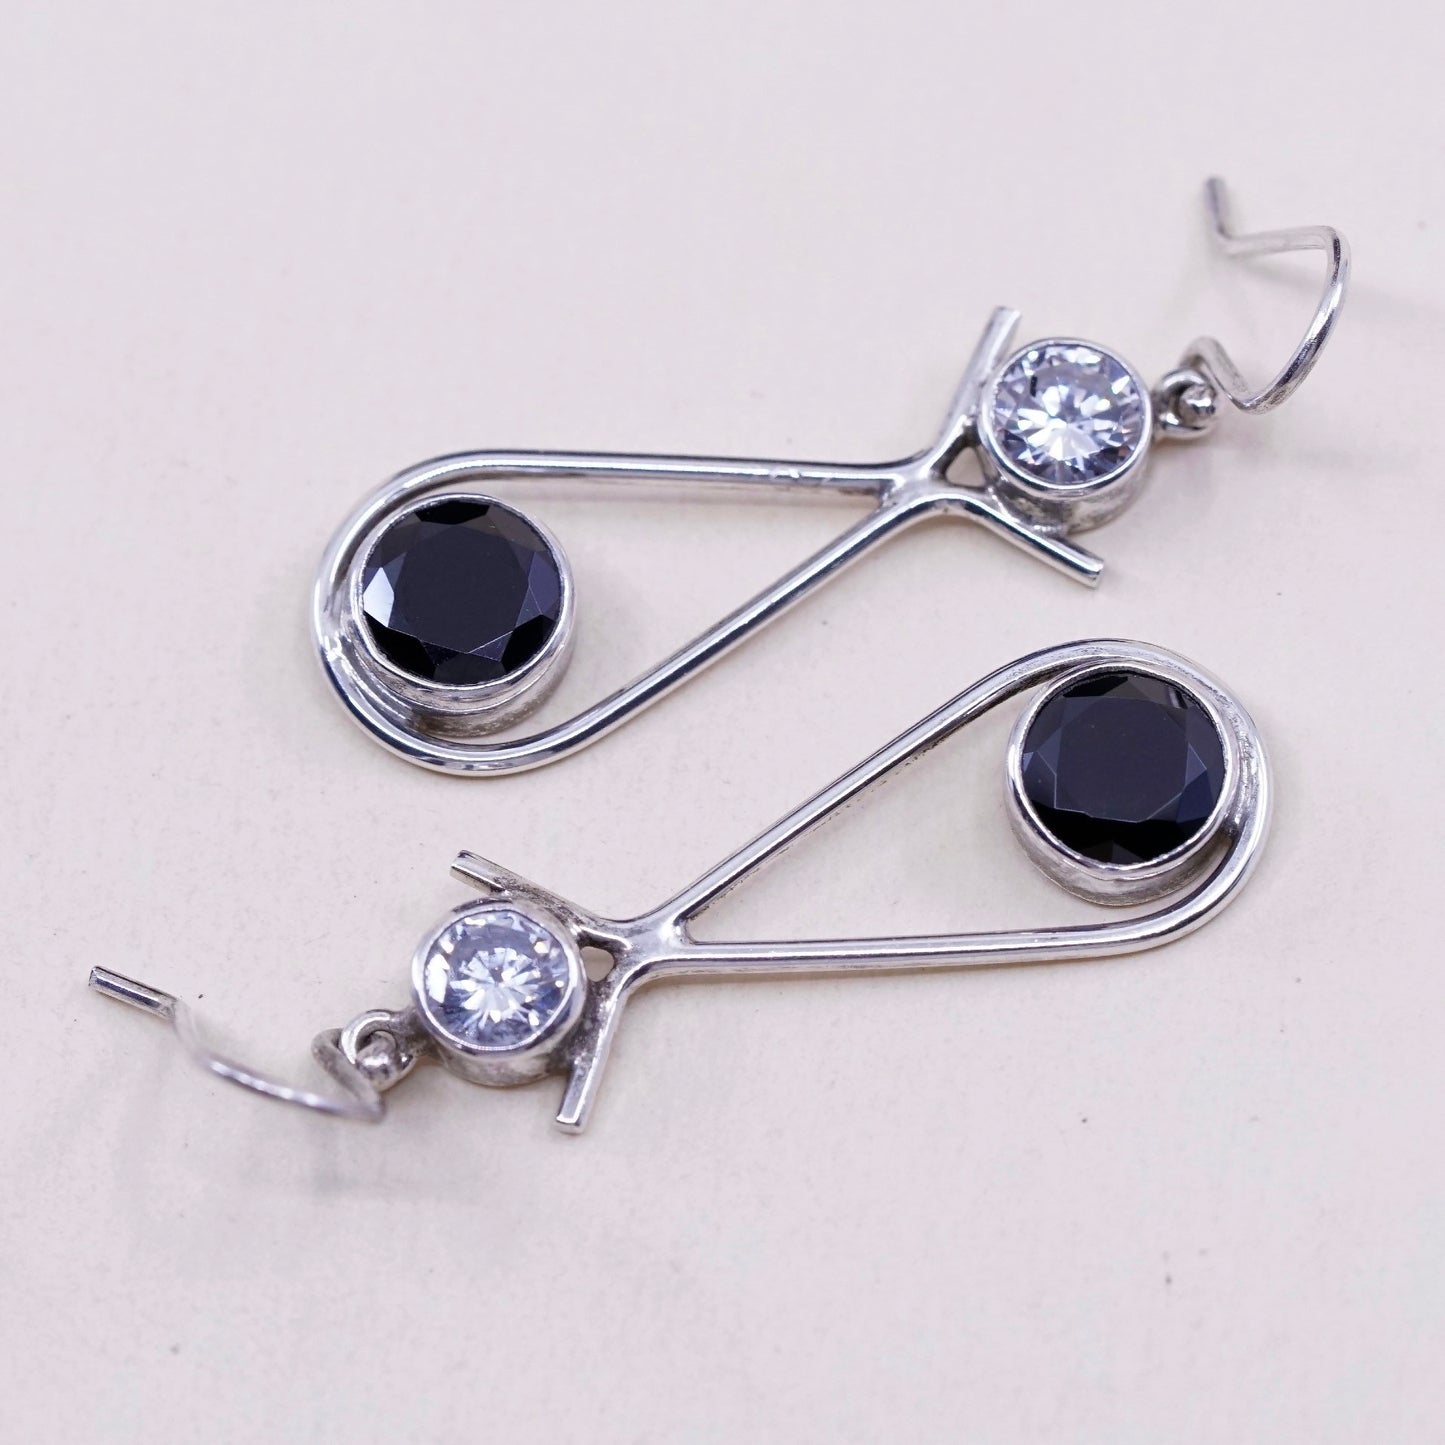 Vintage 925 Sterling silver clip on earrings with hematite and Cz